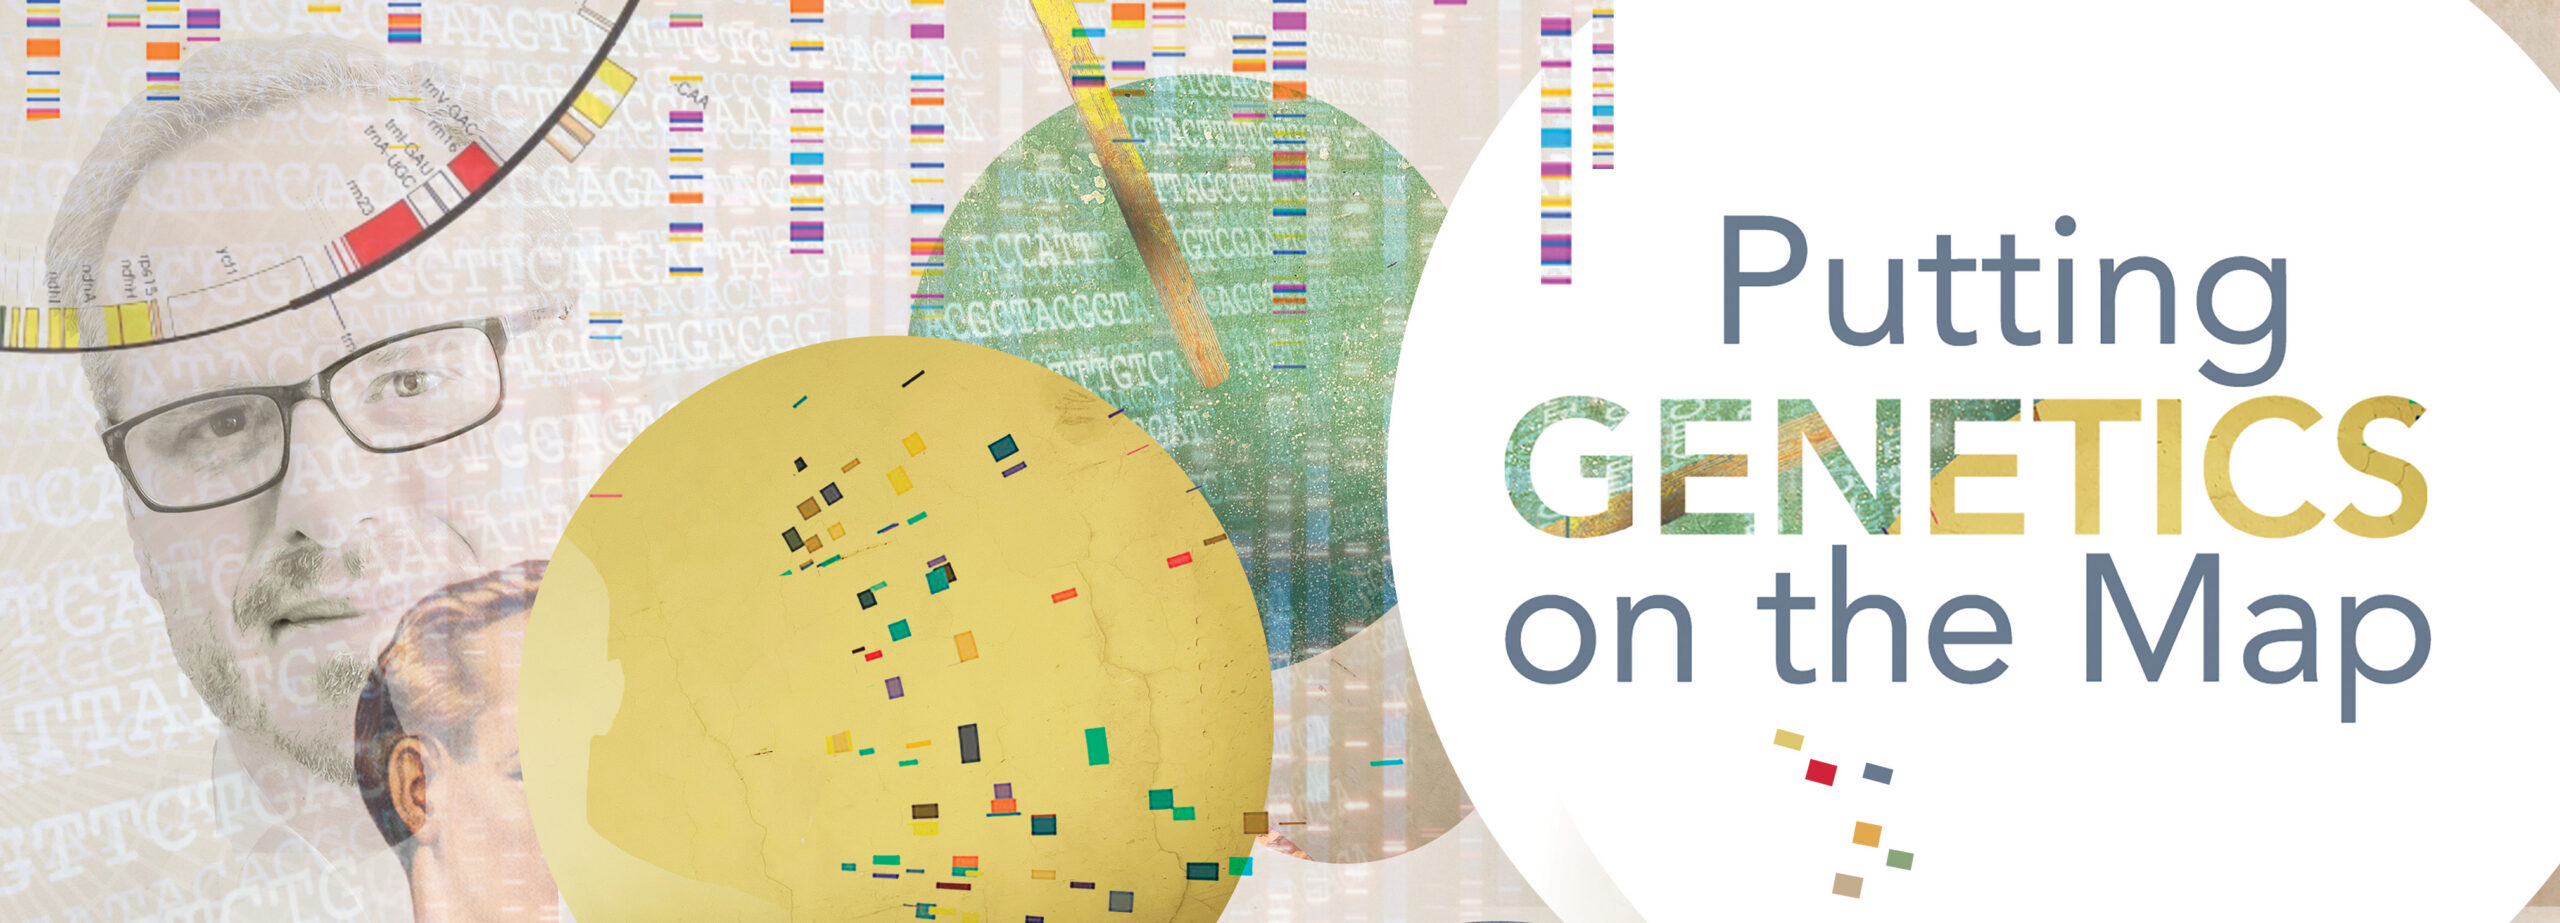 Banner image of genes and the human DNA helix with the title "Putting Genetics on the Map"